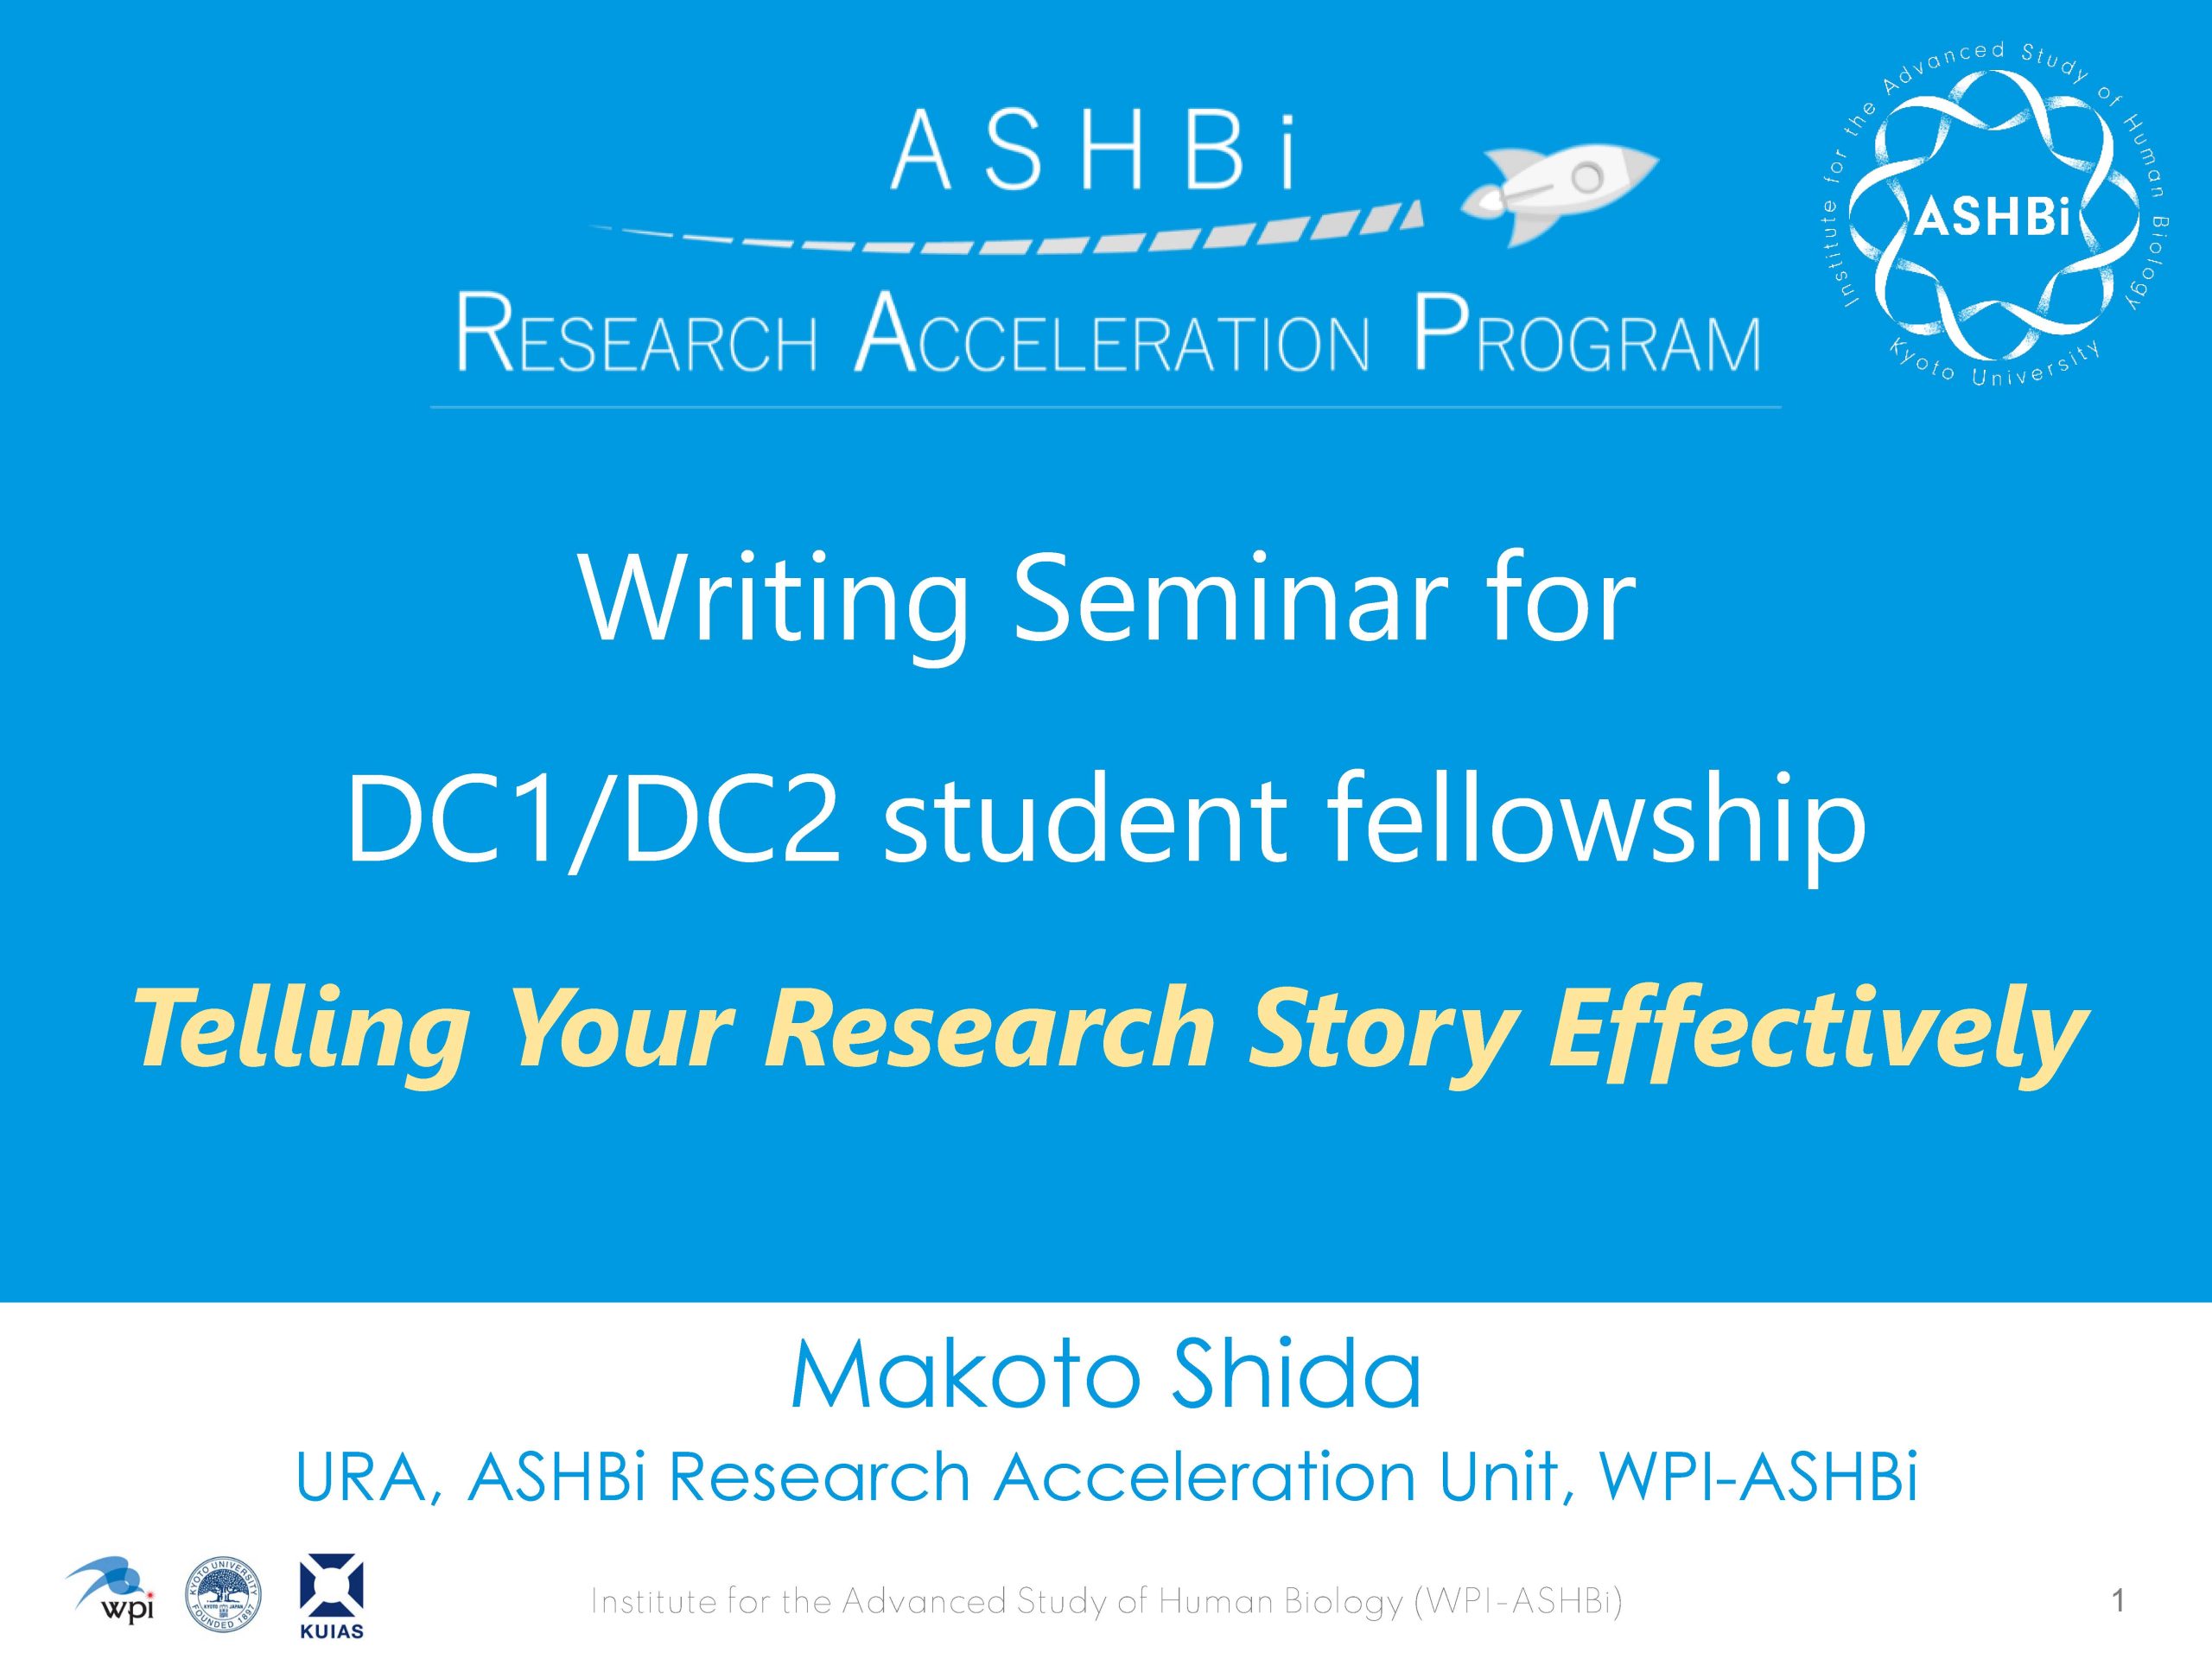 Slides for the Writing Seminar for DC1/DC2 student fellowship (5MB)